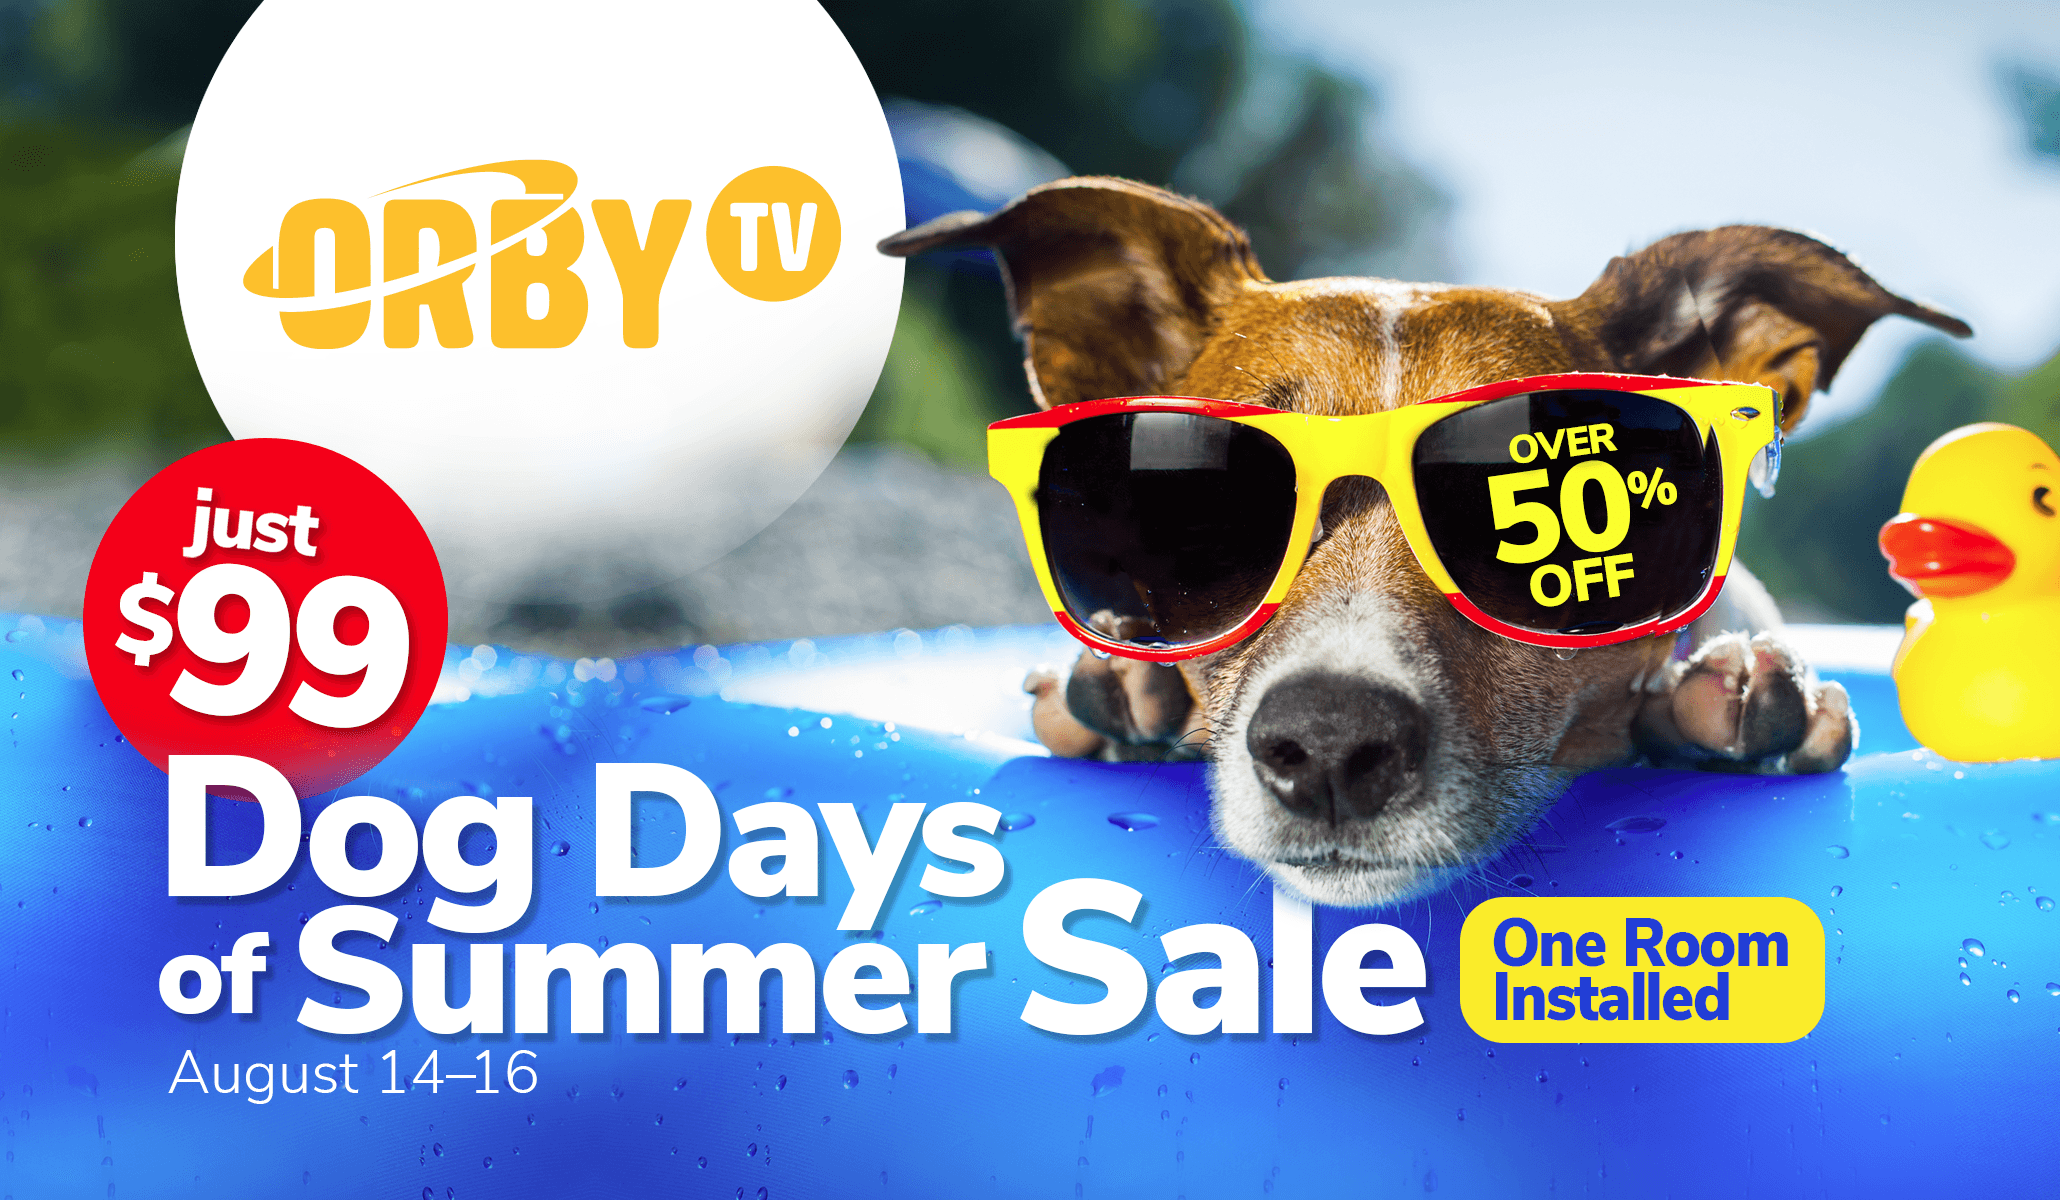 Orby TV Dog Days of Summer Sale